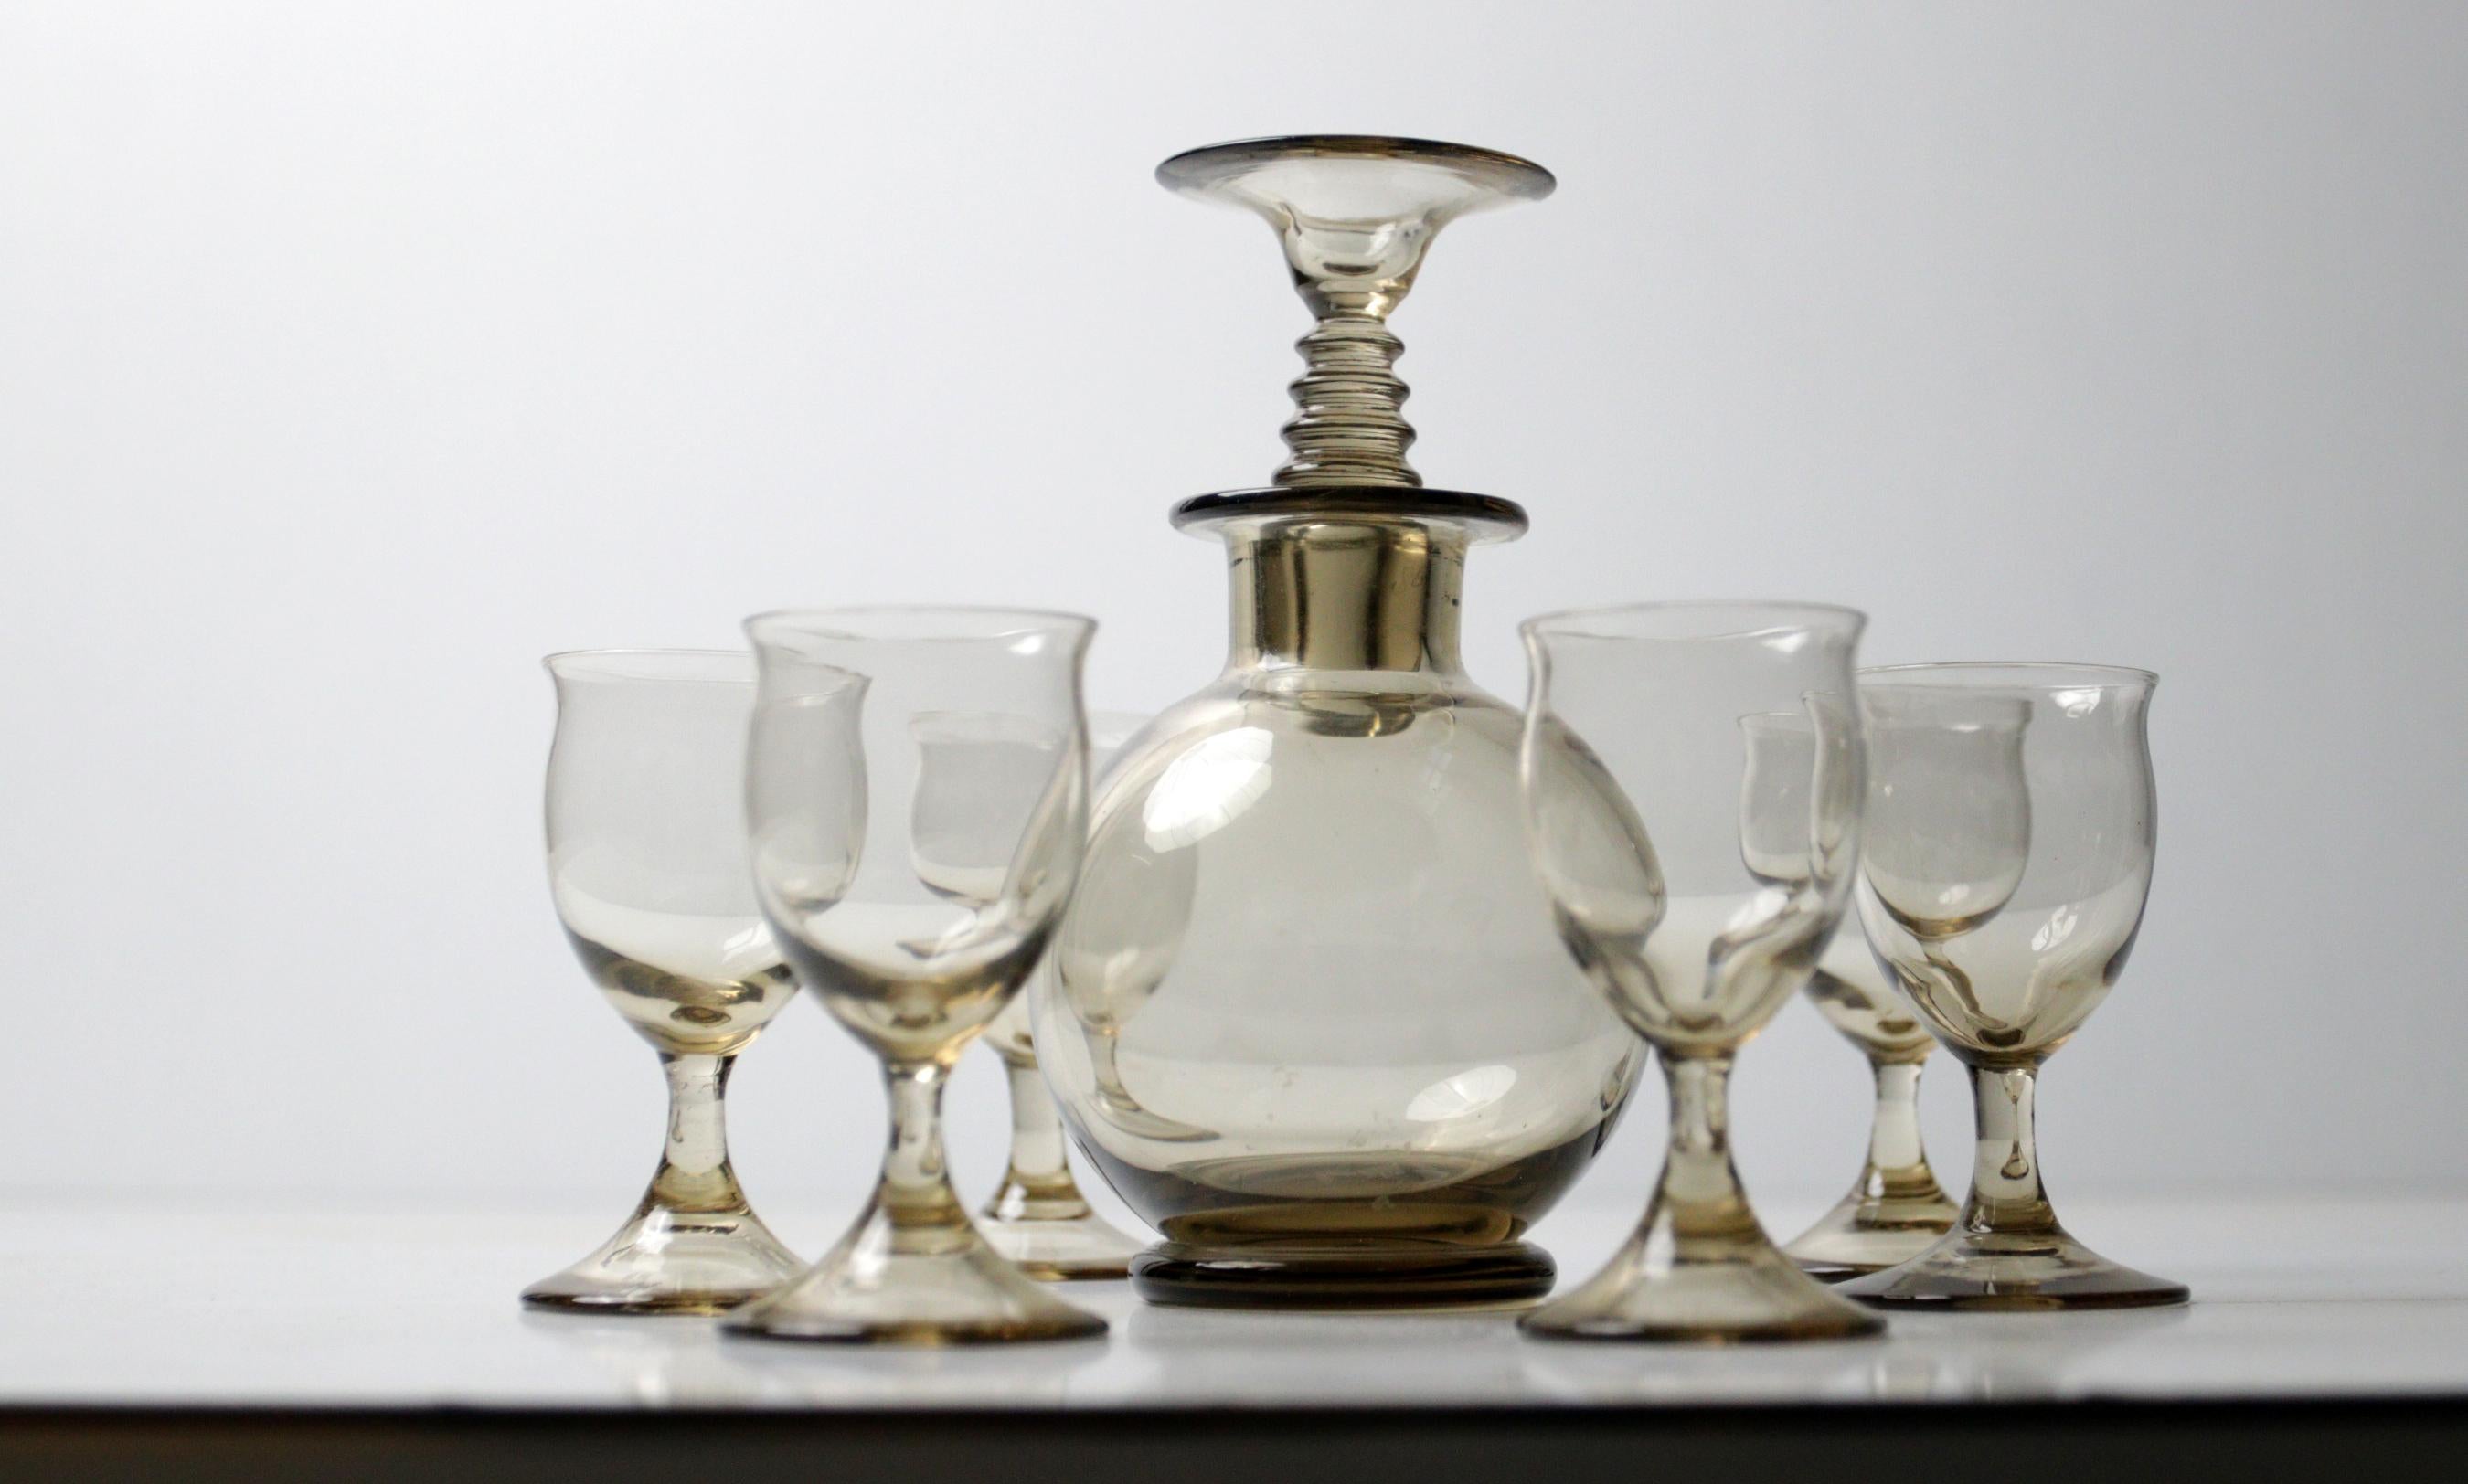 Beautiful little decanter (14cm high) and 6 little glasses designed by Willem Jacob Roozendaal in 1932 for Kristalunie Maastricht.
The set contains 7 pieces and all in a good condition with little traces of use.

Keywords: Christmas gift,